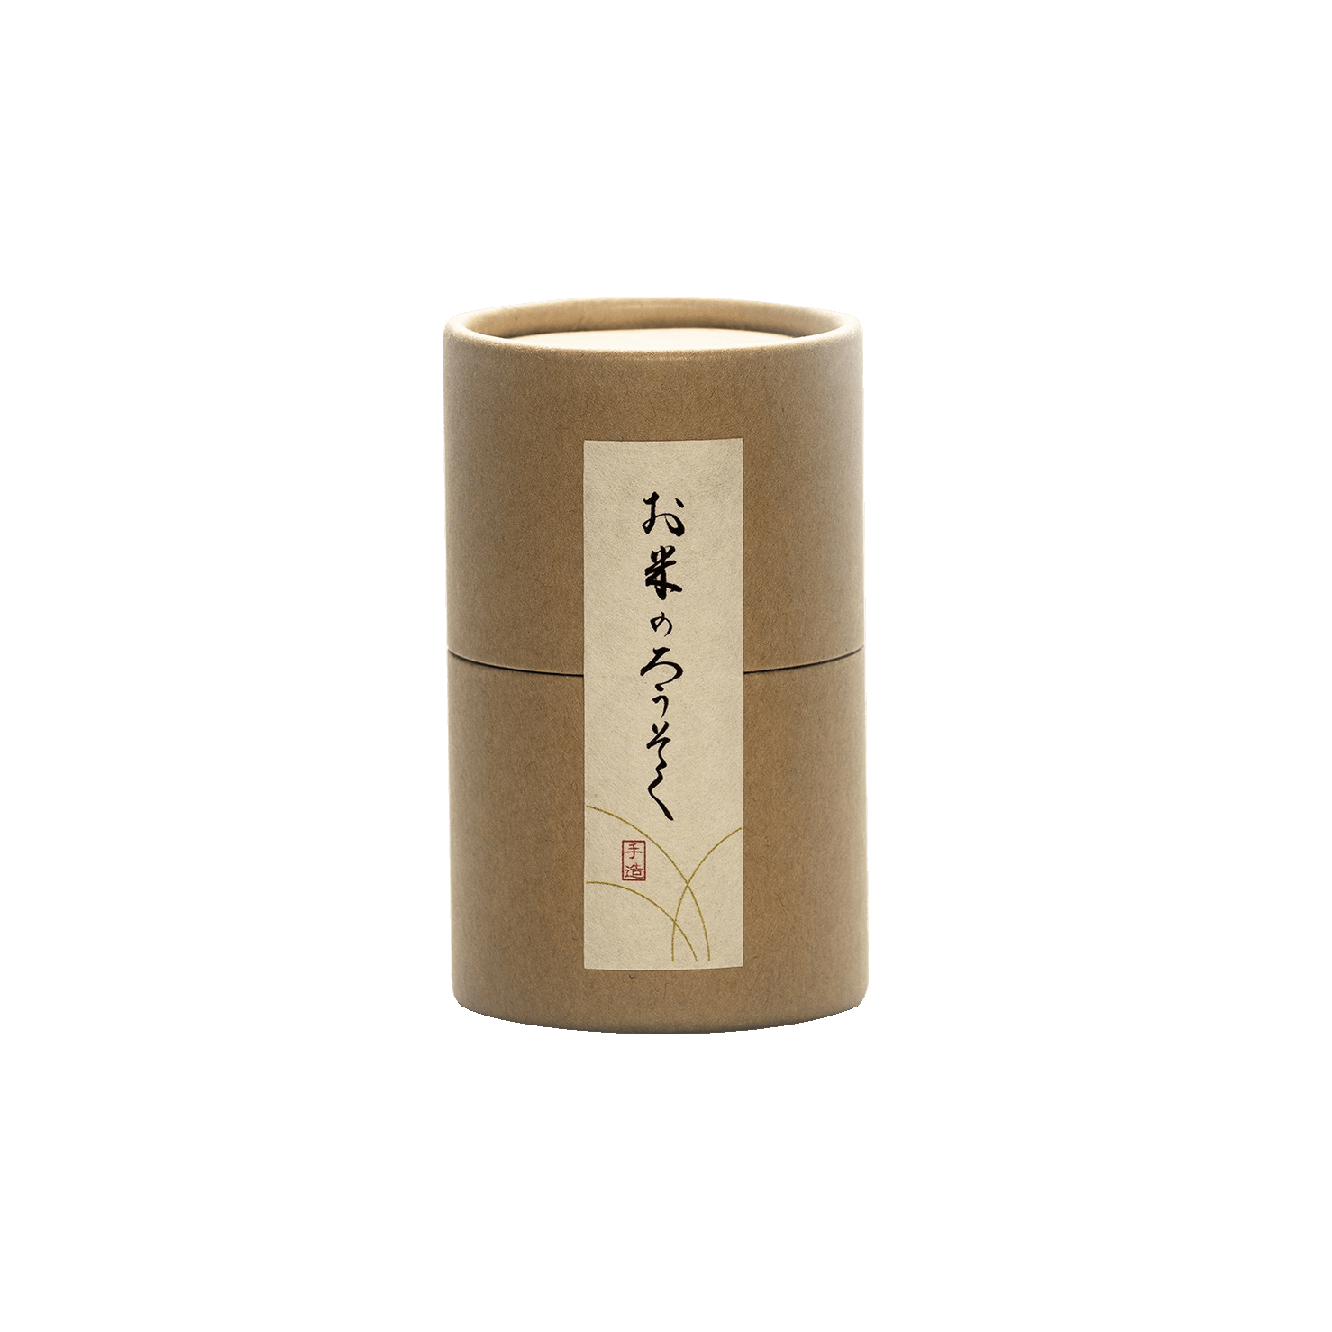 Handmade Japanese Rice Wax Candles in Cylindrical Tub